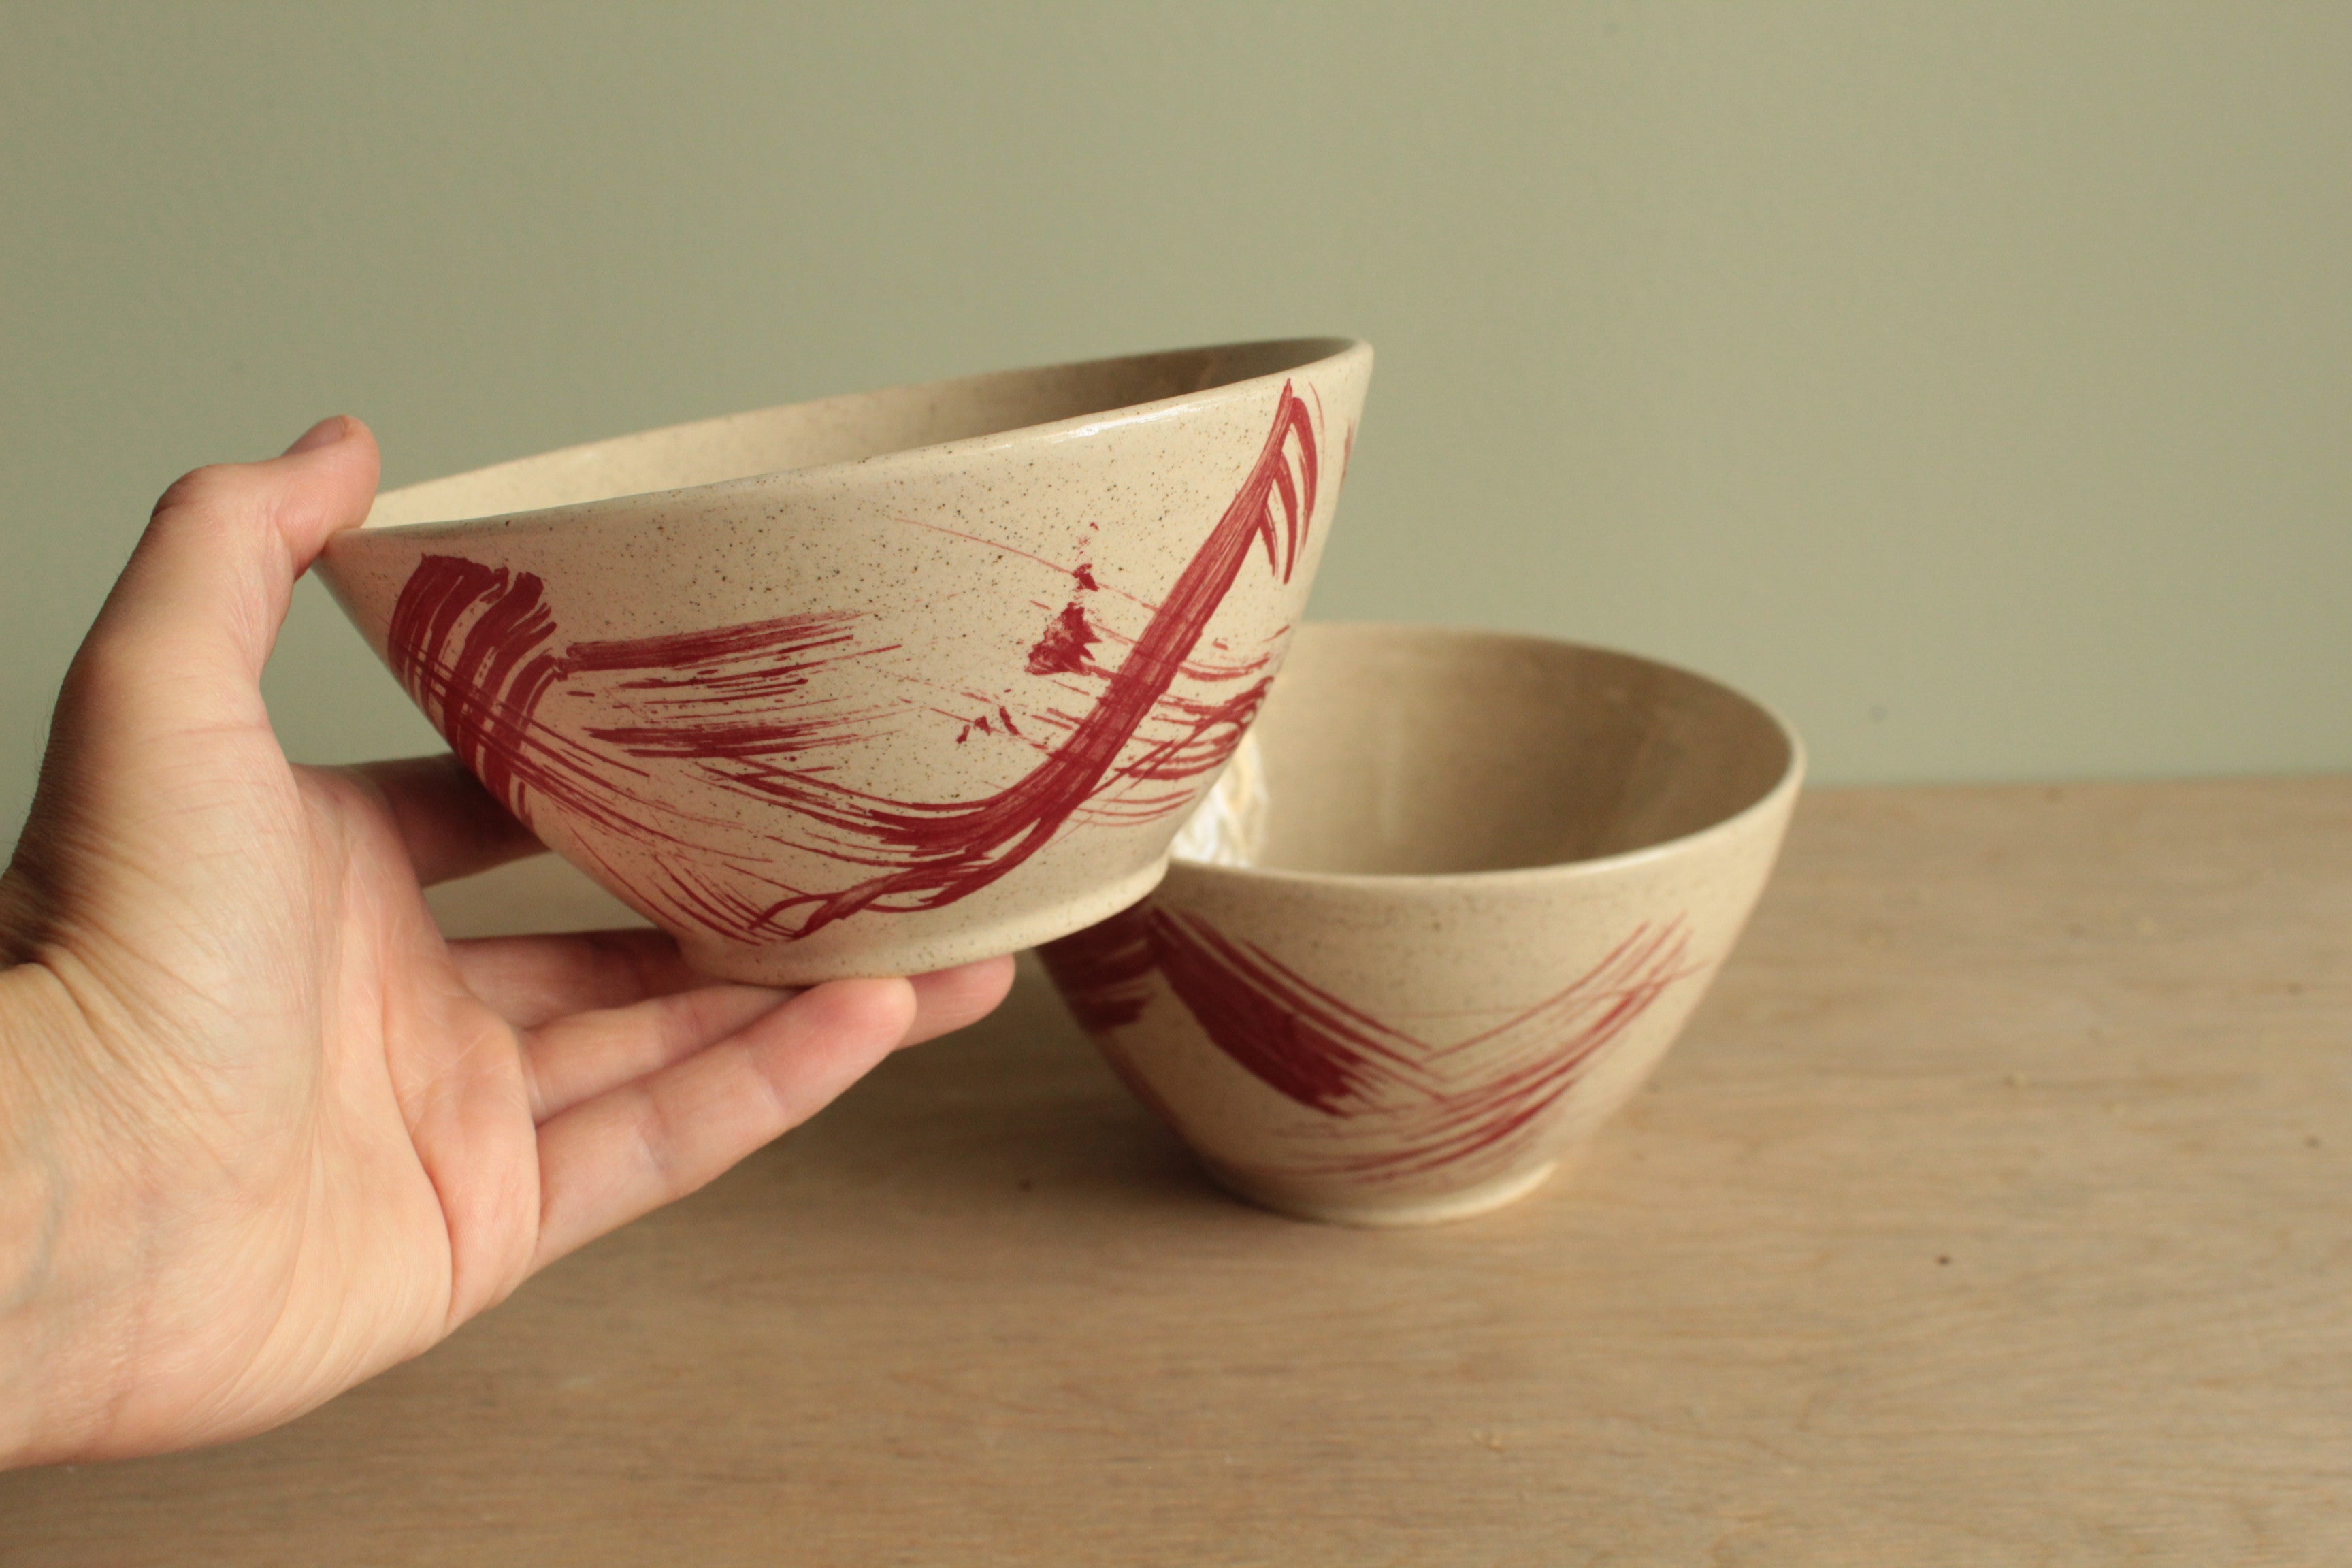 Bowl with red design